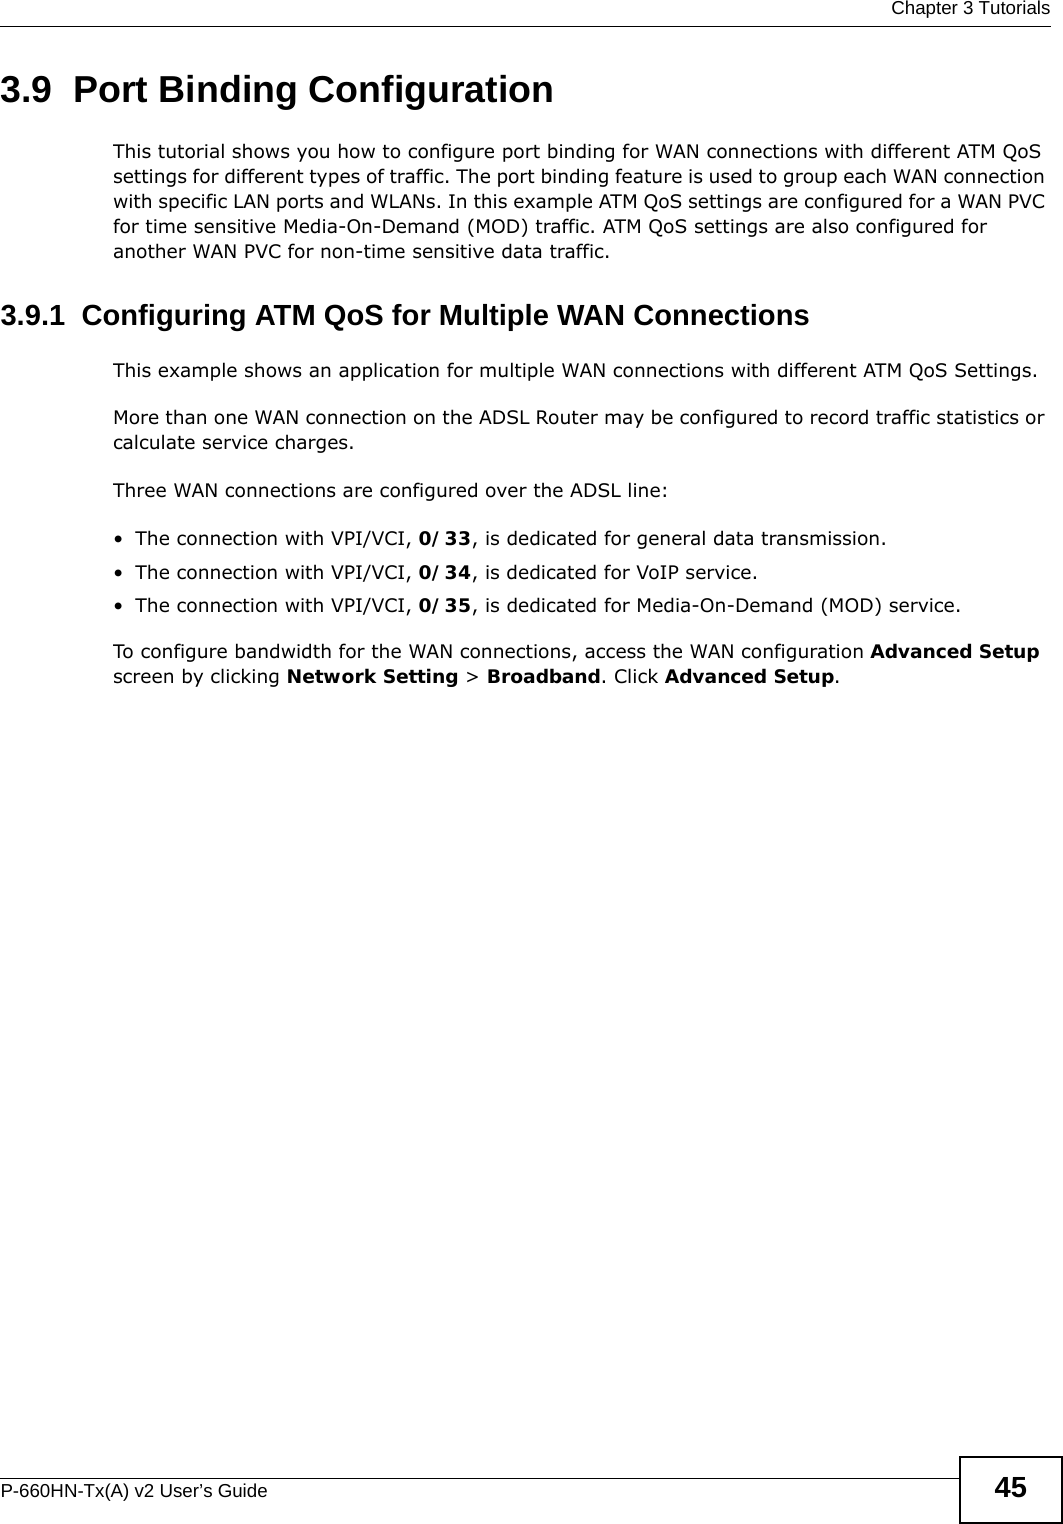  Chapter 3 TutorialsP-660HN-Tx(A) v2 User’s Guide 453.9  Port Binding ConfigurationThis tutorial shows you how to configure port binding for WAN connections with different ATM QoS settings for different types of traffic. The port binding feature is used to group each WAN connection with specific LAN ports and WLANs. In this example ATM QoS settings are configured for a WAN PVC for time sensitive Media-On-Demand (MOD) traffic. ATM QoS settings are also configured for another WAN PVC for non-time sensitive data traffic. 3.9.1  Configuring ATM QoS for Multiple WAN ConnectionsThis example shows an application for multiple WAN connections with different ATM QoS Settings.More than one WAN connection on the ADSL Router may be configured to record traffic statistics or calculate service charges.Three WAN connections are configured over the ADSL line:• The connection with VPI/VCI, 0/33, is dedicated for general data transmission.• The connection with VPI/VCI, 0/34, is dedicated for VoIP service.• The connection with VPI/VCI, 0/35, is dedicated for Media-On-Demand (MOD) service.To configure bandwidth for the WAN connections, access the WAN configuration Advanced Setup screen by clicking Network Setting &gt; Broadband. Click Advanced Setup.